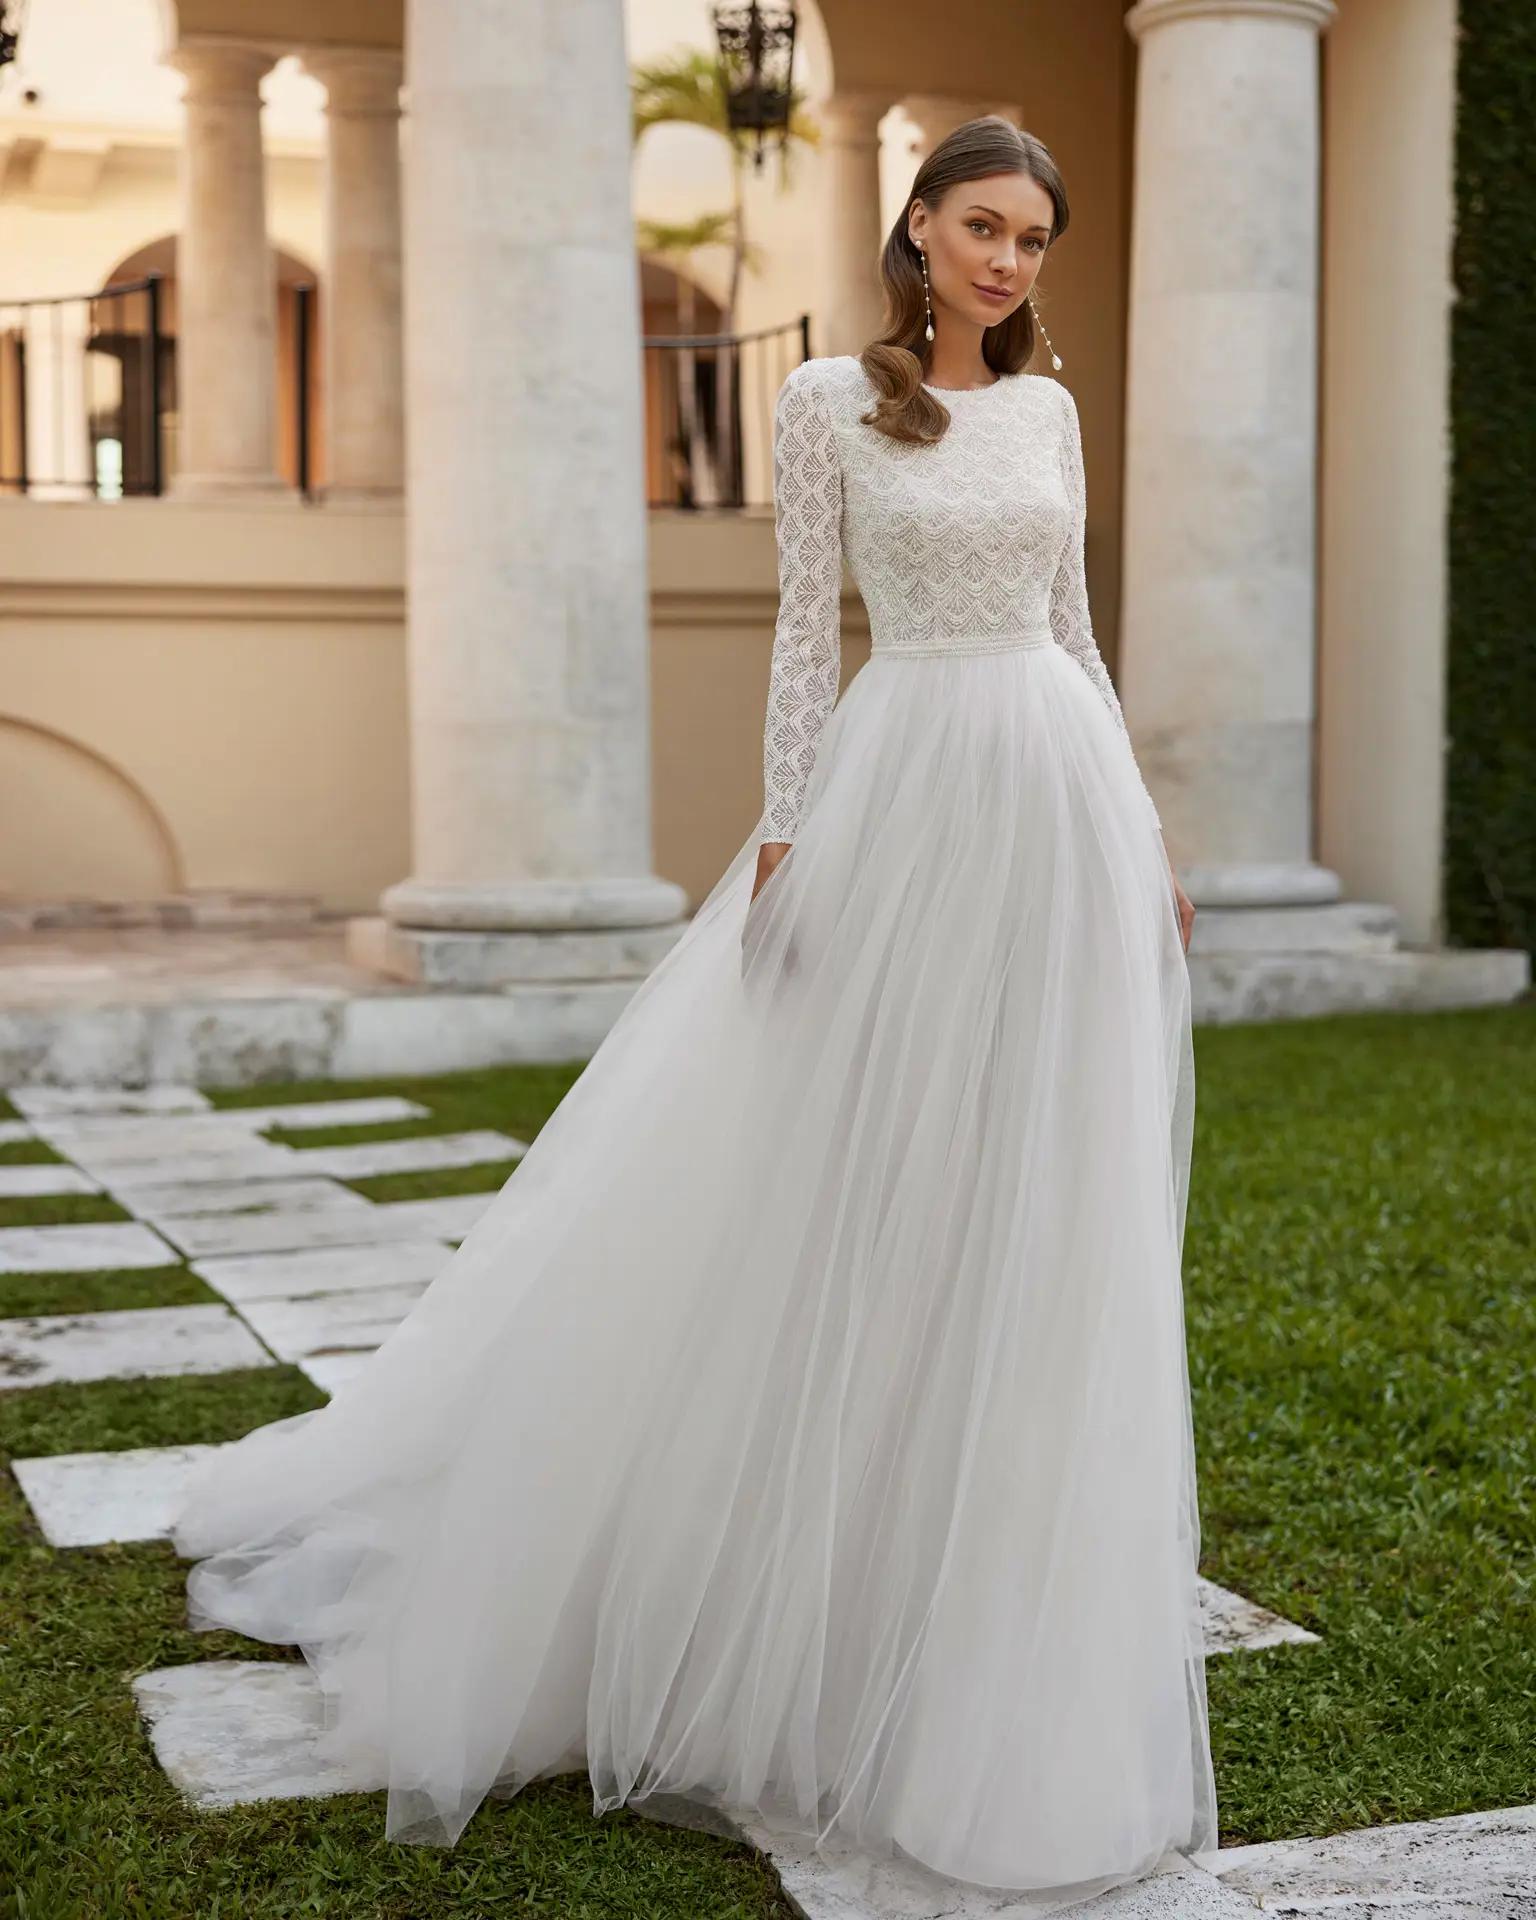 Erma wedding dress by Rosa Clara with long beaded lace sleeves high neckline and open back, large ballgown tulle skirt